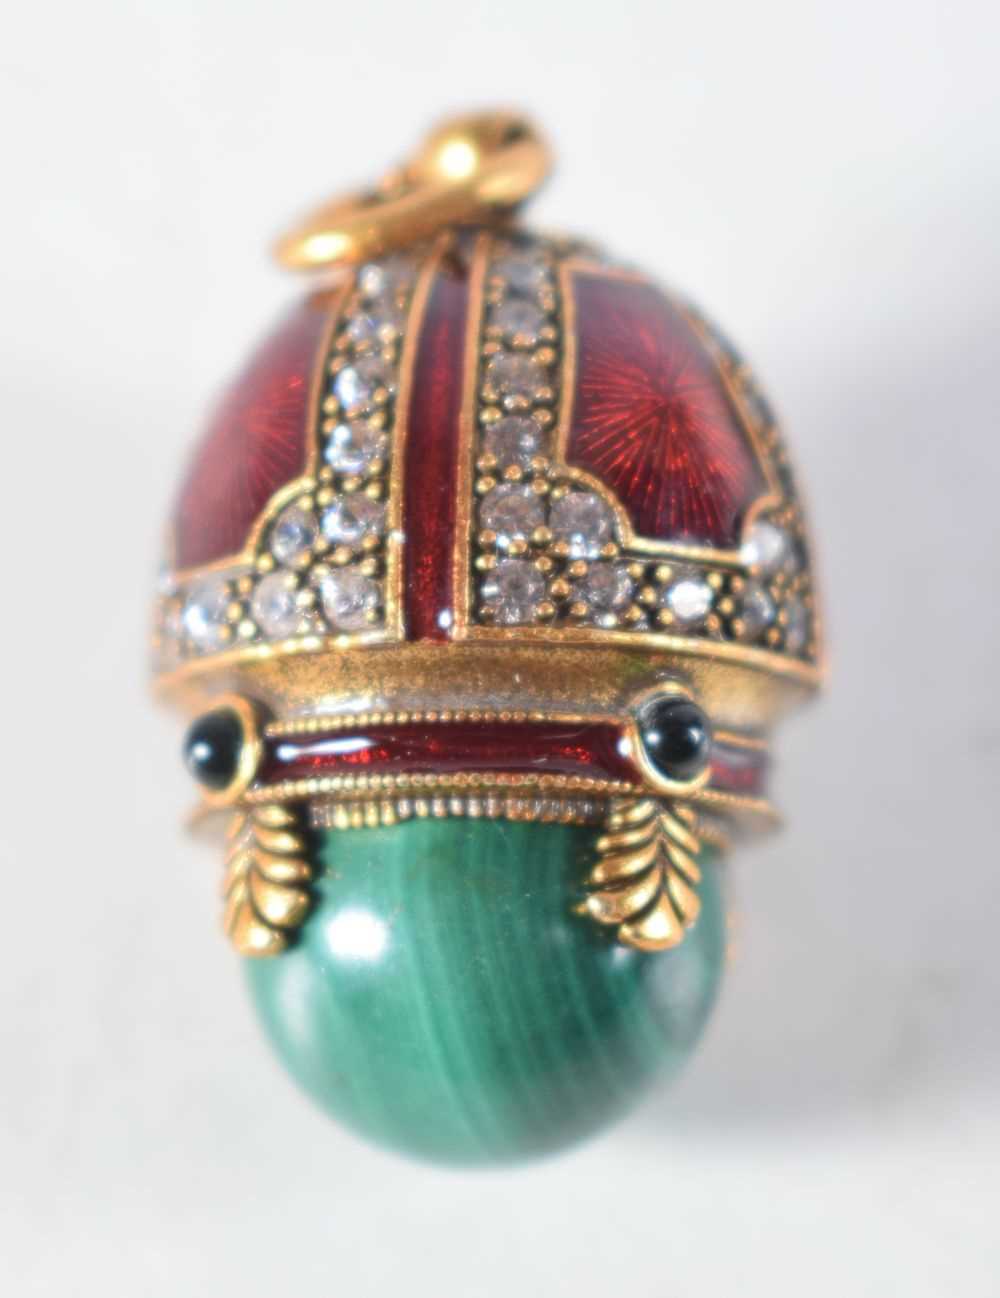 A Continental Silver Gilt, Enamel and Malachite Egg Pendant. Stamped 84, 2.6 cm x 1.7cm, weight 10.